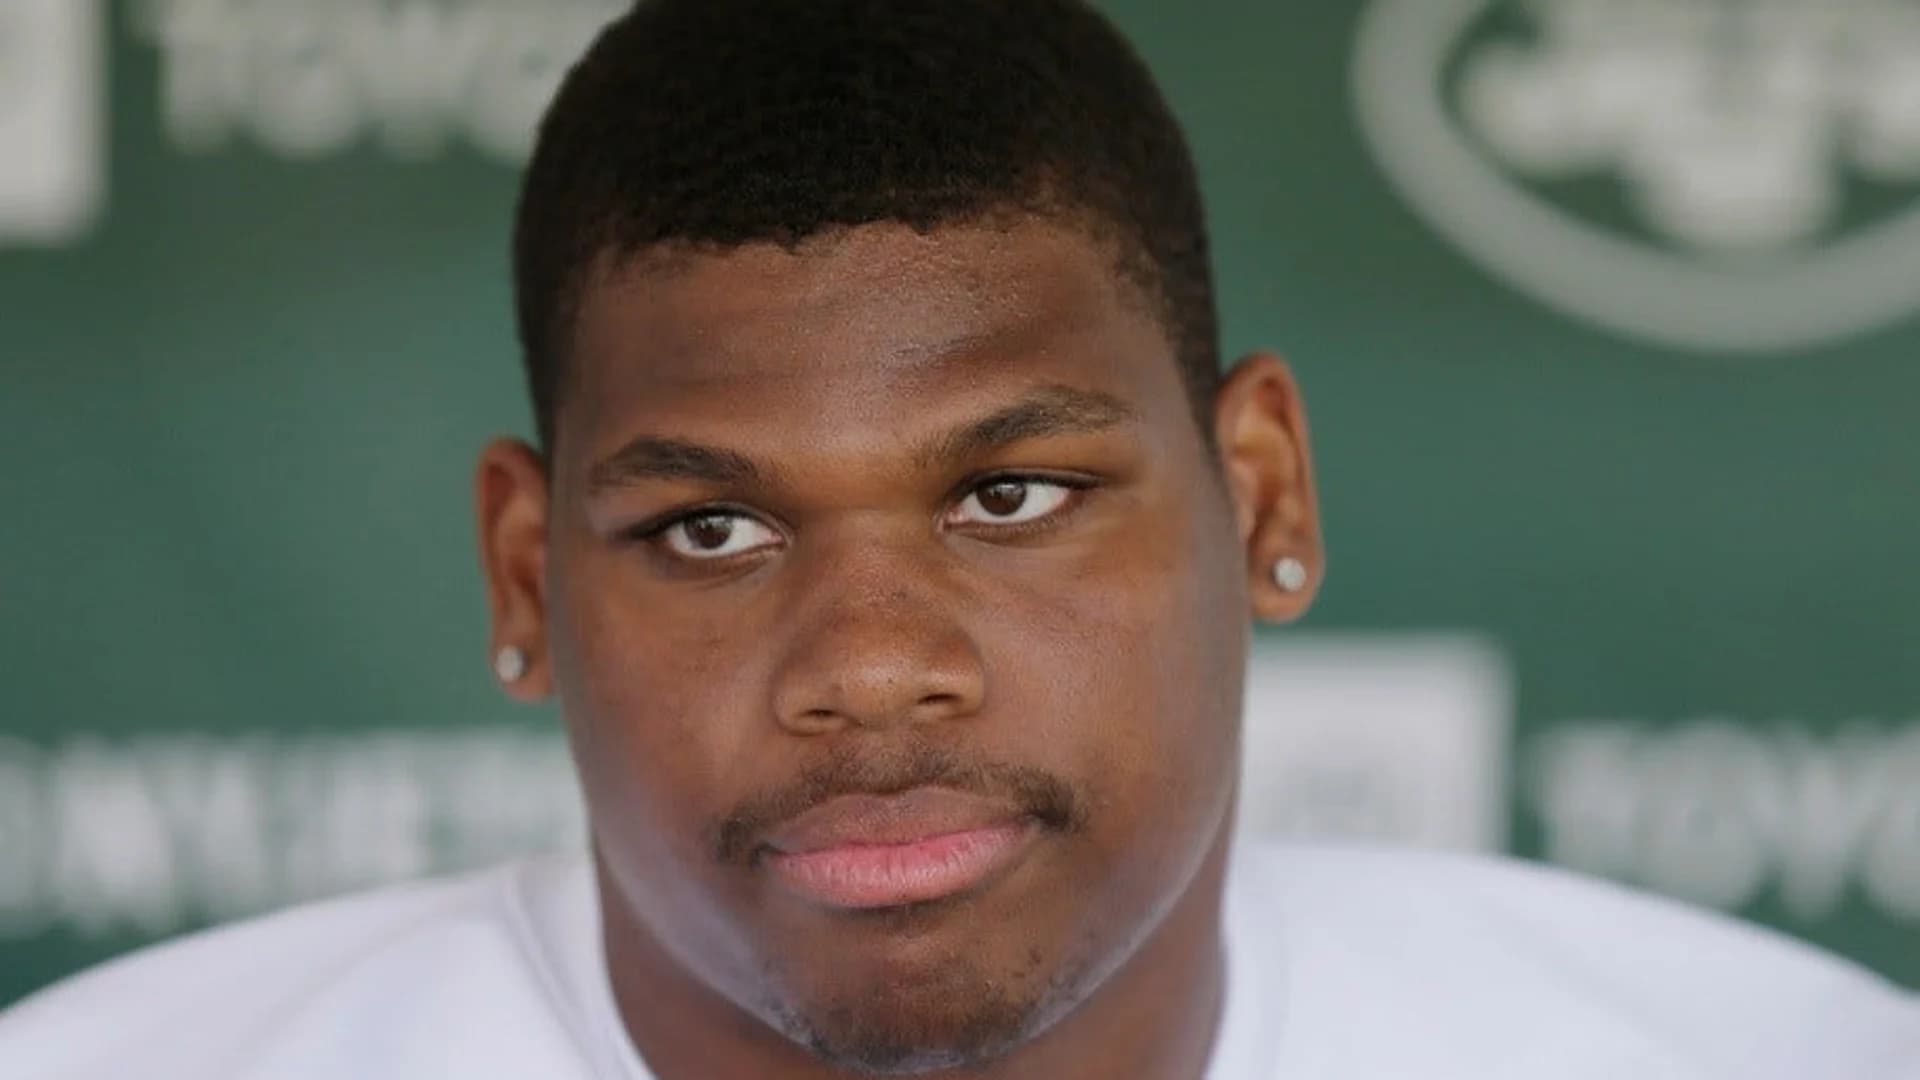 Jets' Quinnen Williams arrested for carrying gun at airport